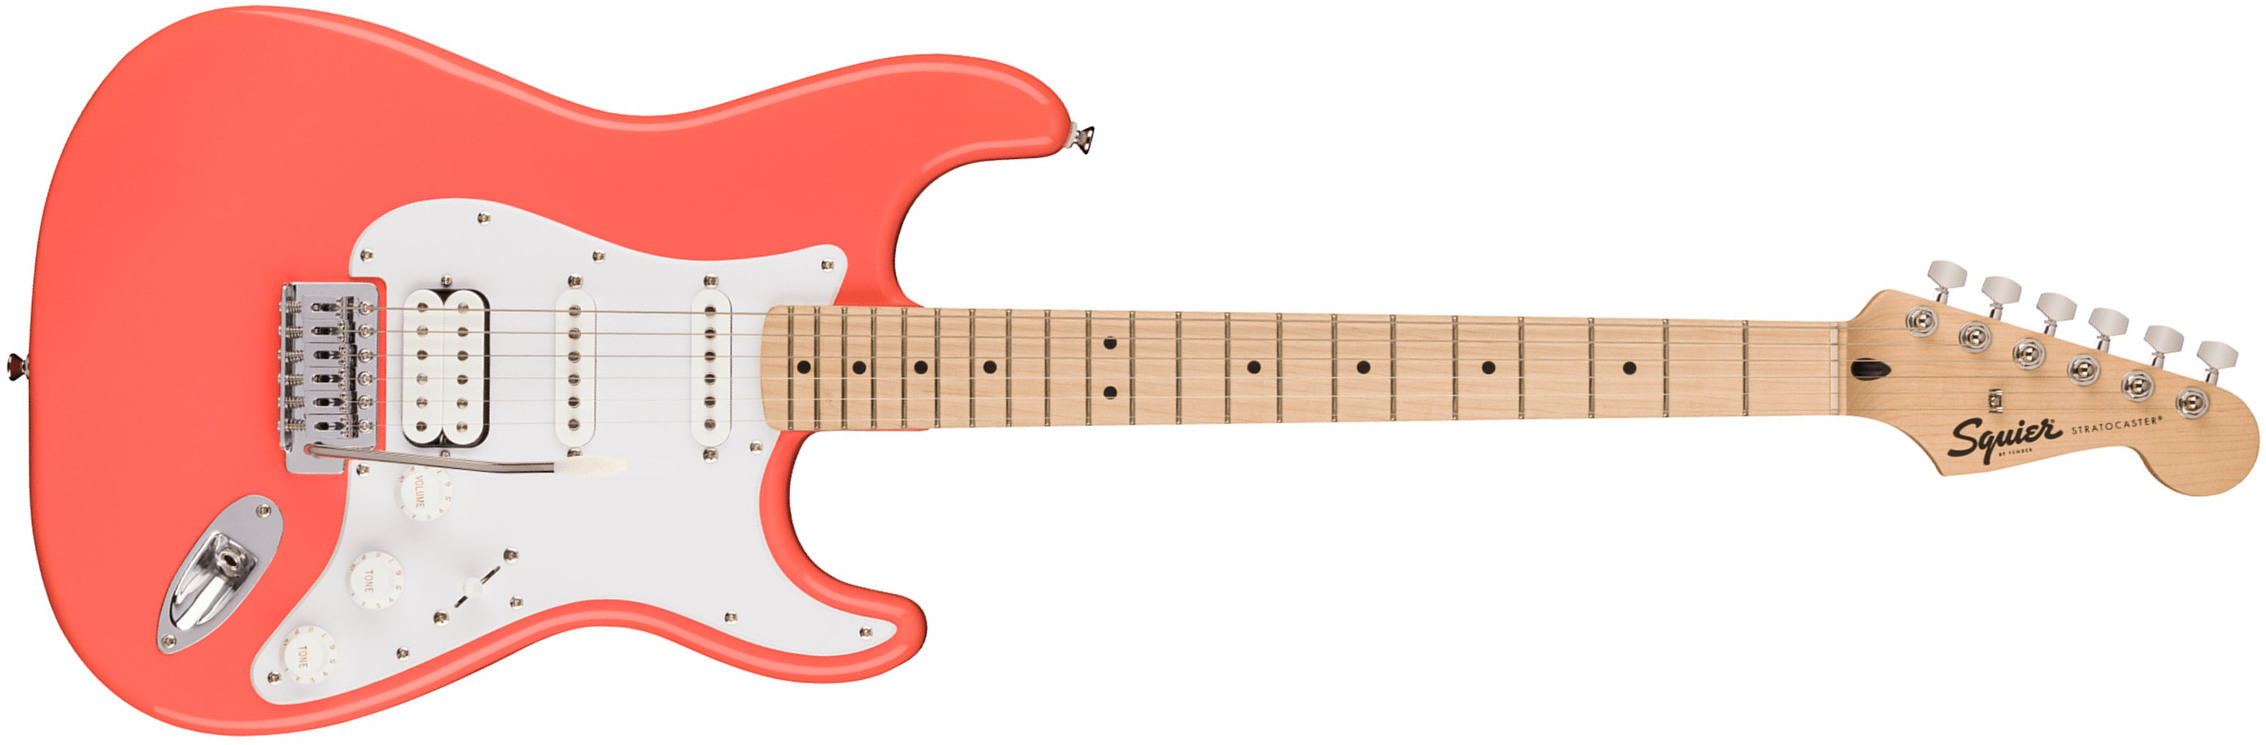 Squier Strat Sonic Hss Trem Mn - Tahitian Coral - E-Gitarre in Str-Form - Main picture